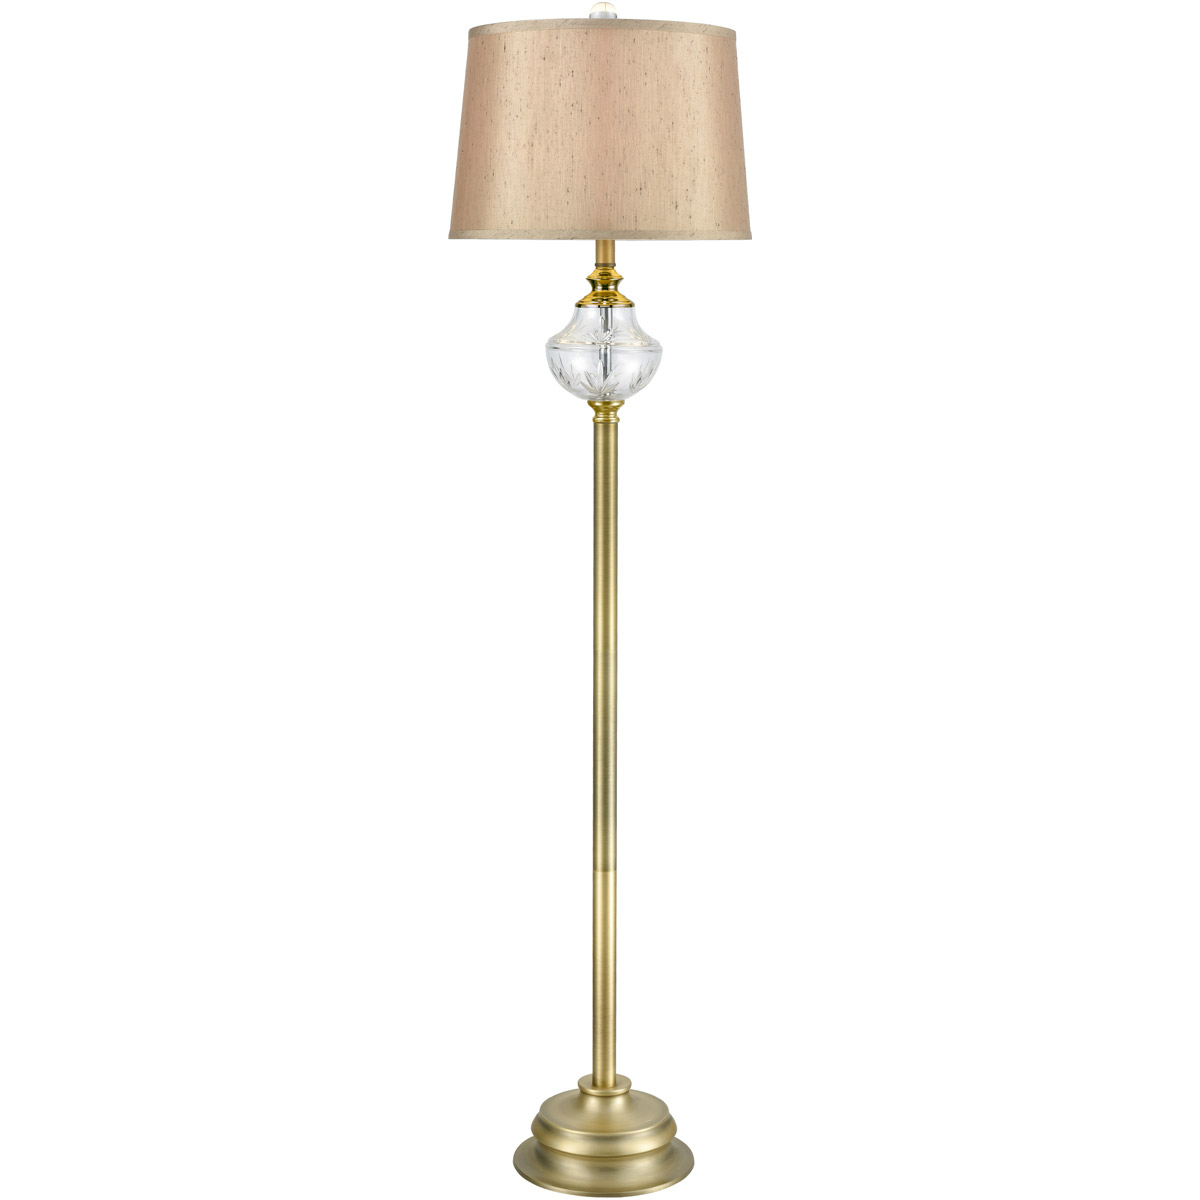 Details About Dale Tiffany Sgf17176 Walker Floor Lamp Golden Antique Brass pertaining to size 1200 X 1200